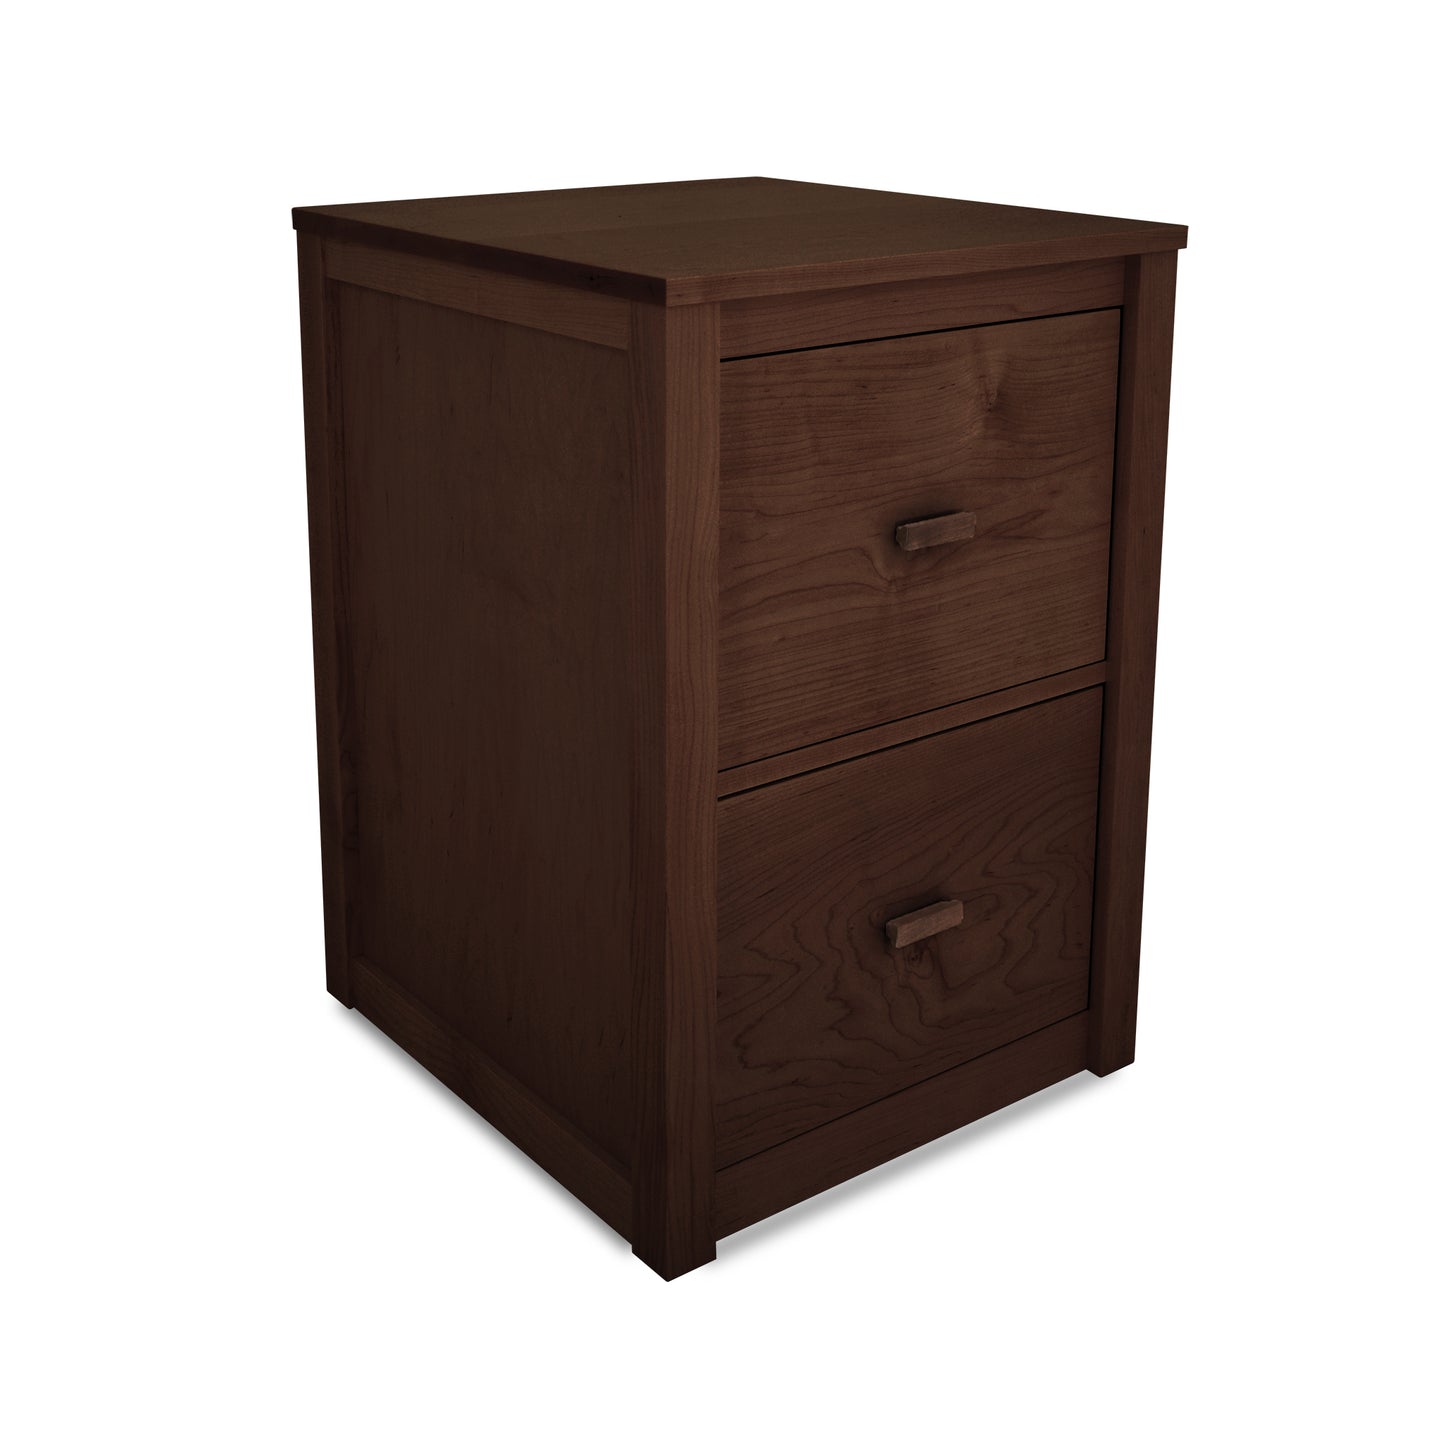 A Andover Modern File Cabinet with two drawers isolated on a white background.